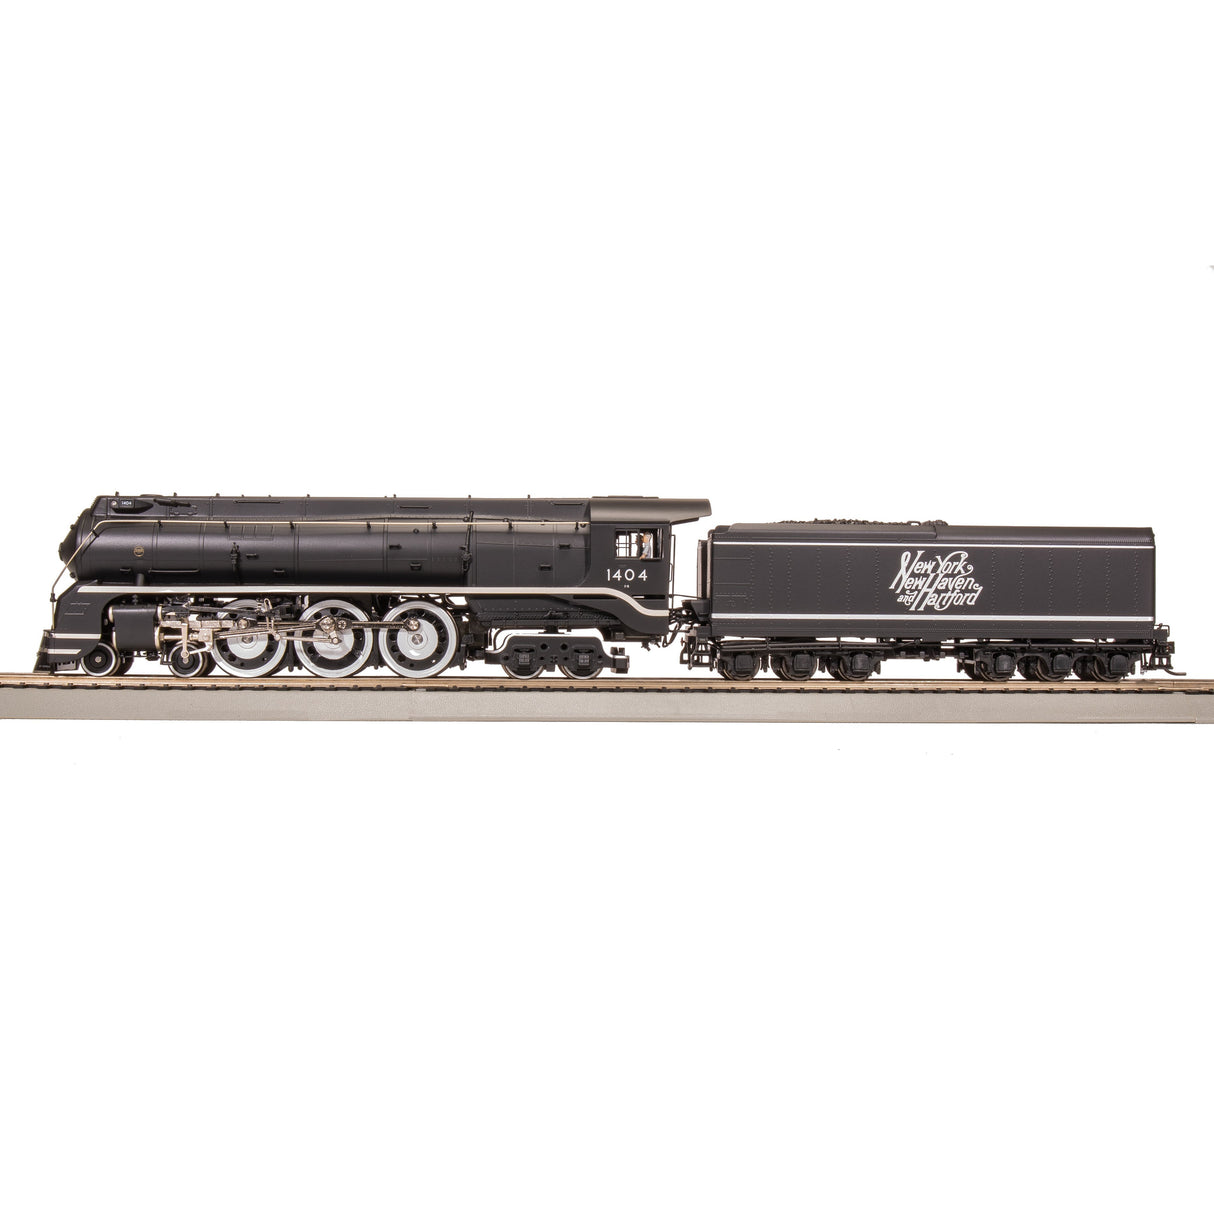 Broadway Limited HO Scale HY NH I-5 4-6-4 Steam Locomotive #1404/Large Script DC/DCC Southernn